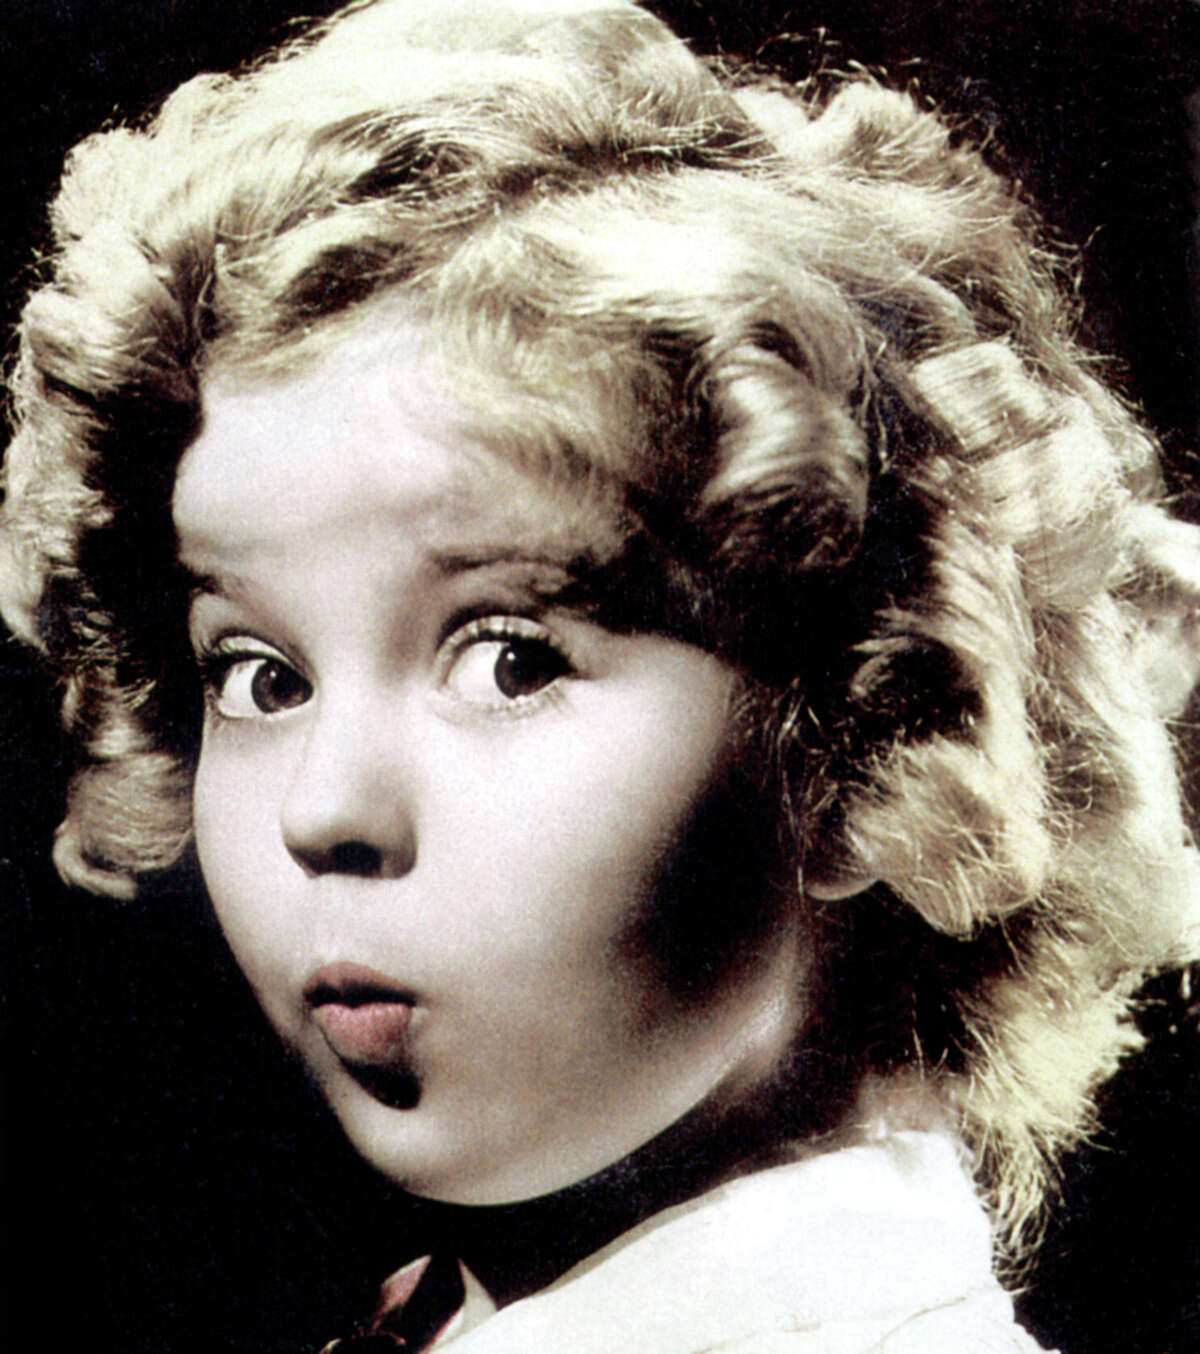 Circa 1930s: Shirley Temple and her famous baby face.